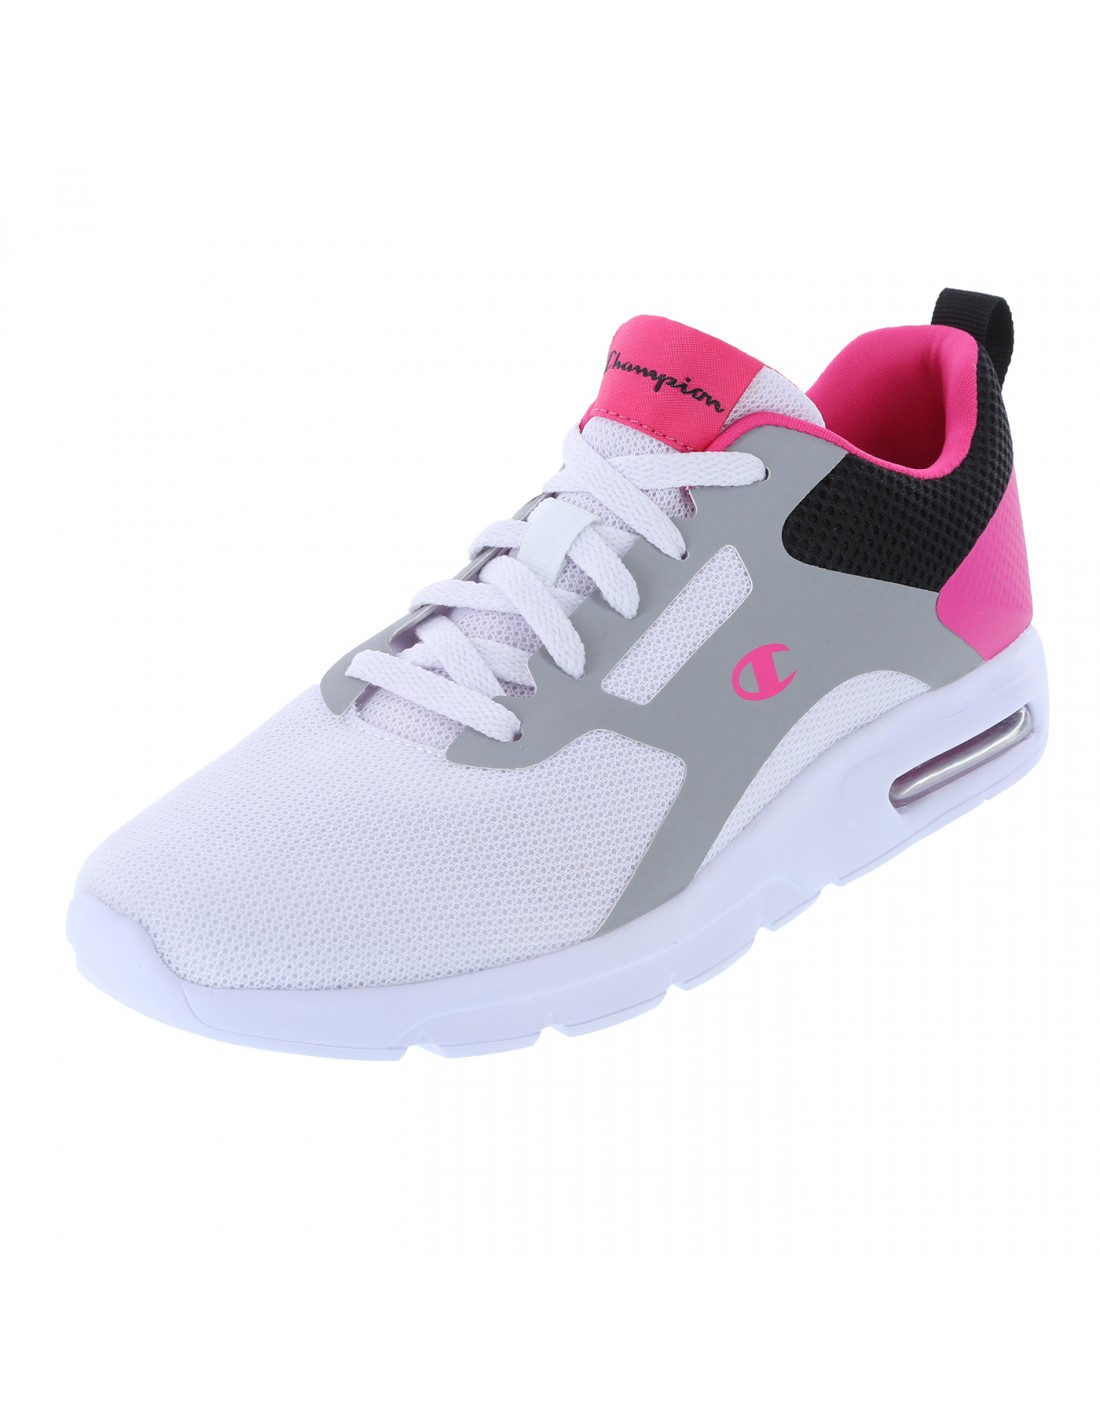 payless champion women's shoes